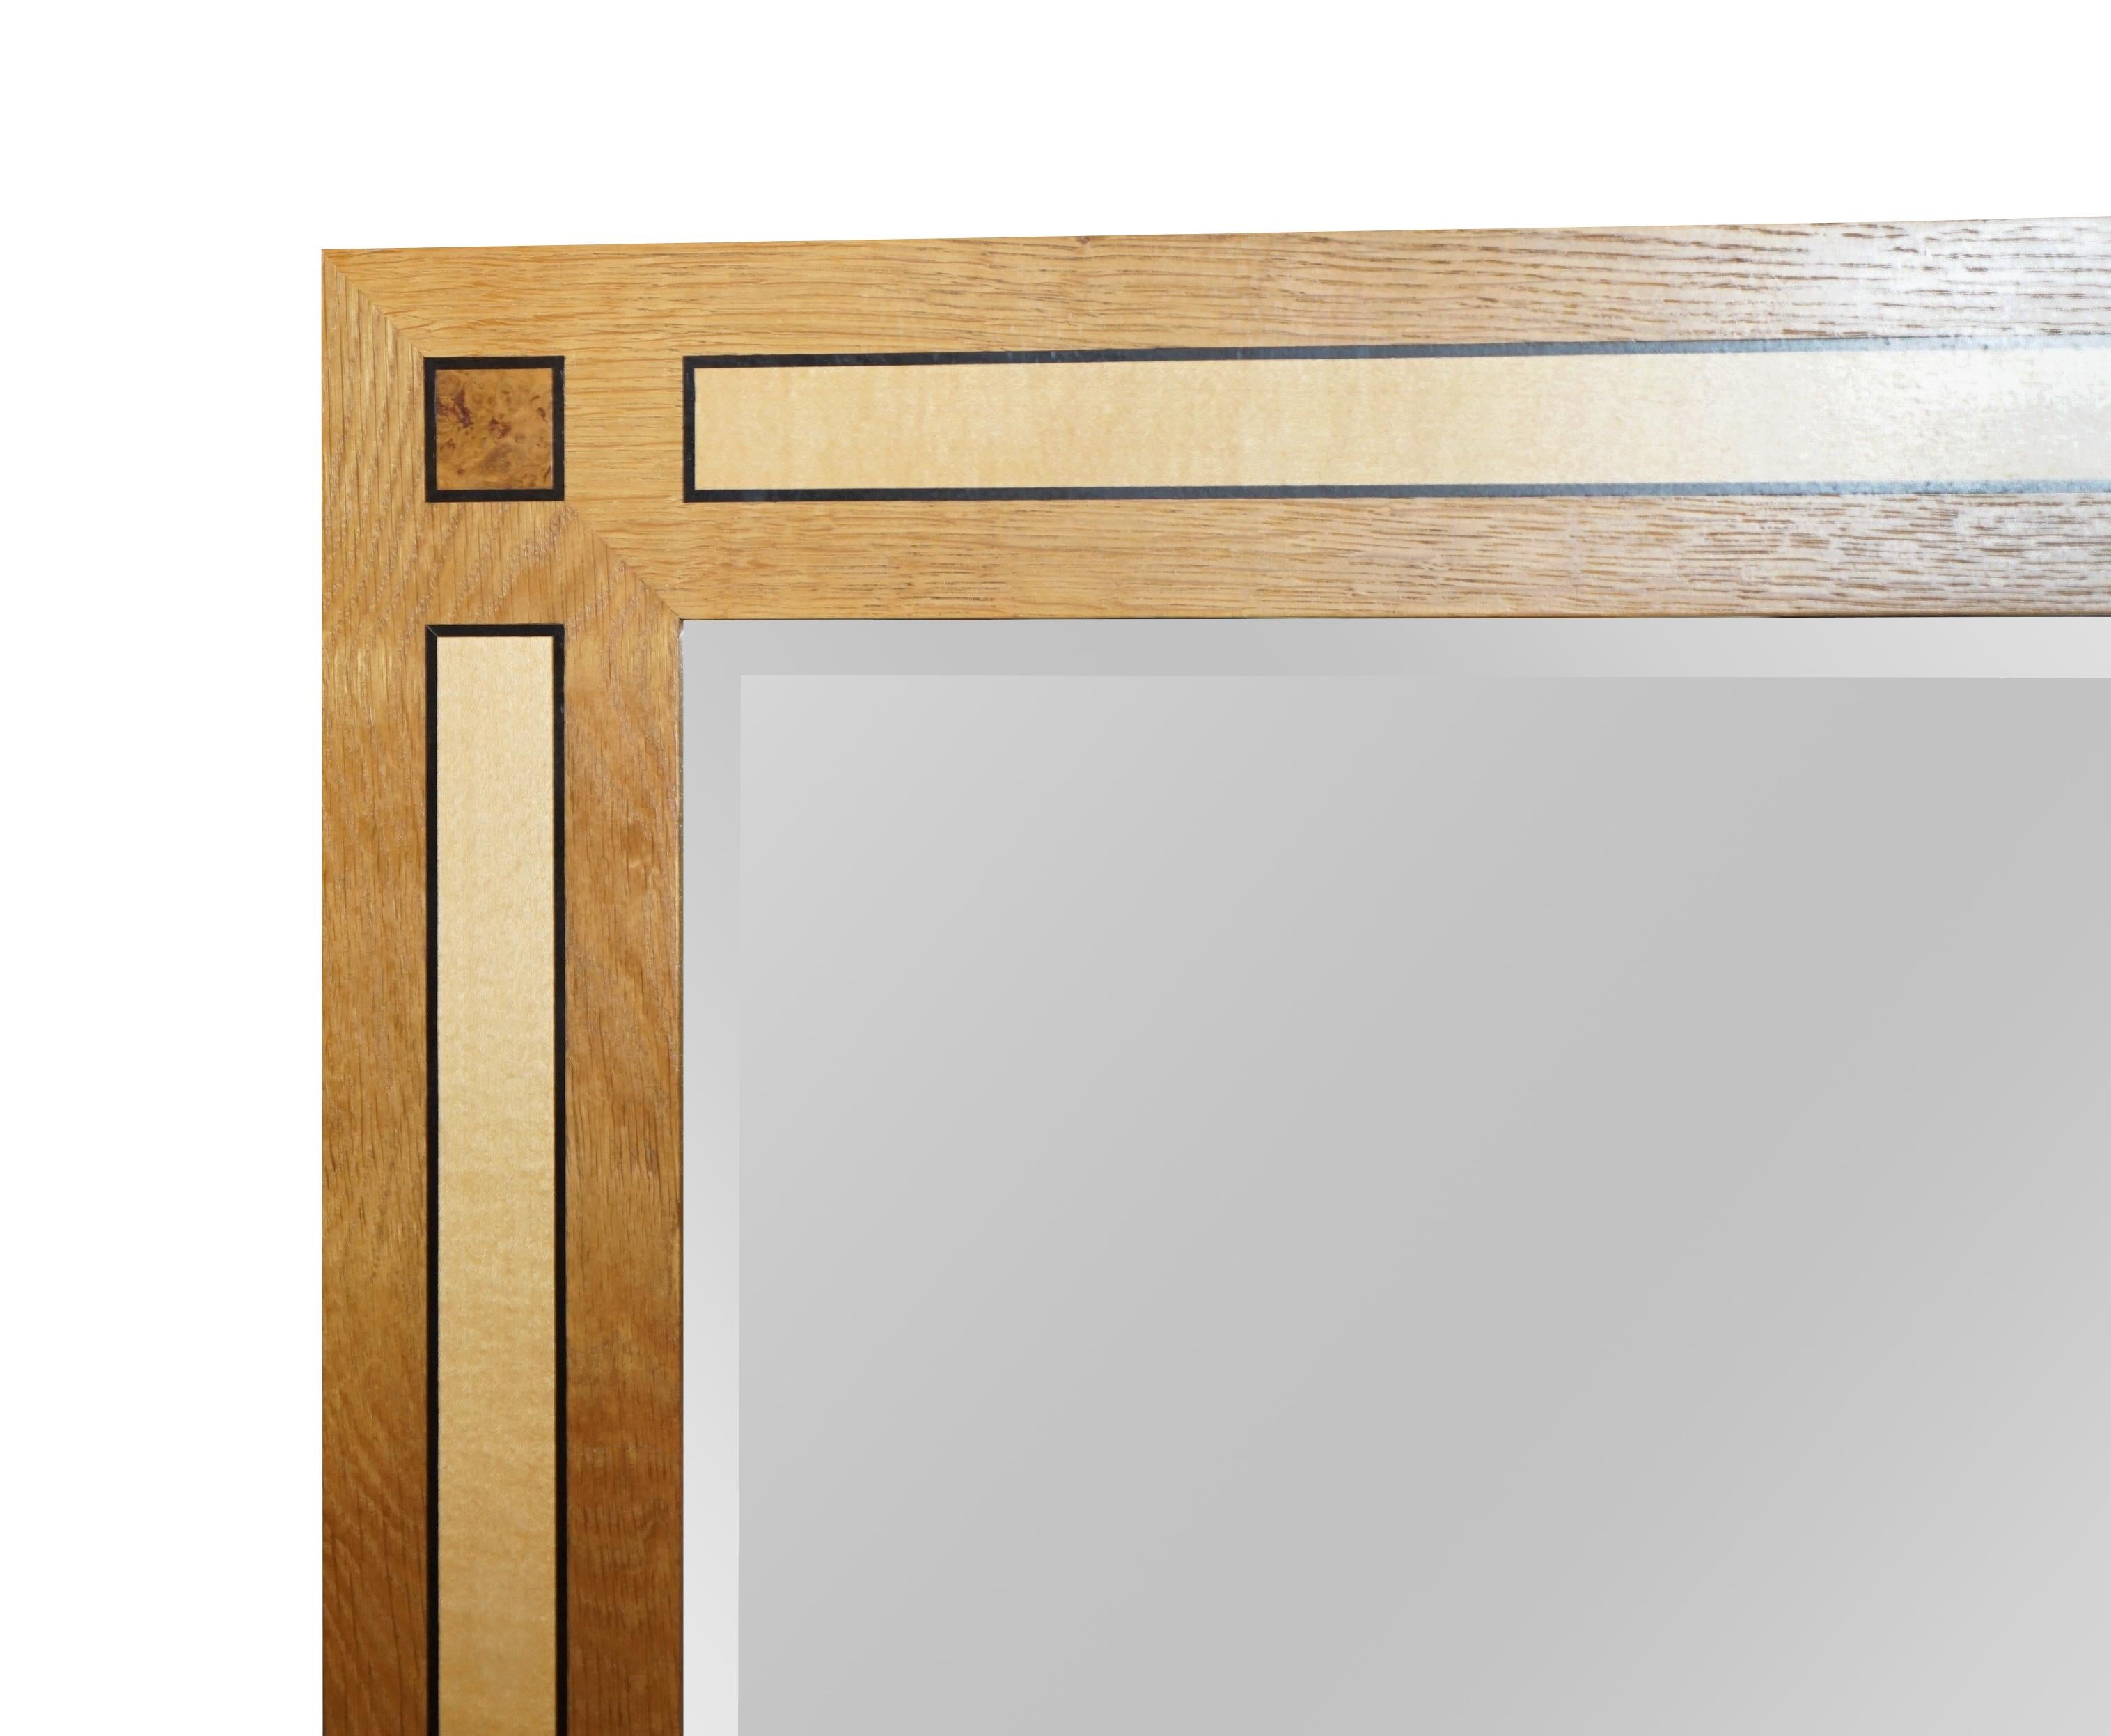 We are delighted to offer this absolutely exquisite original stamped Viscount David Linley overmantel wall mirror in Sycamore, burr walnut and satinwood

The mirror truly is impressive, it weighs an absolute tonne, it must be 80kgs, the bevelled